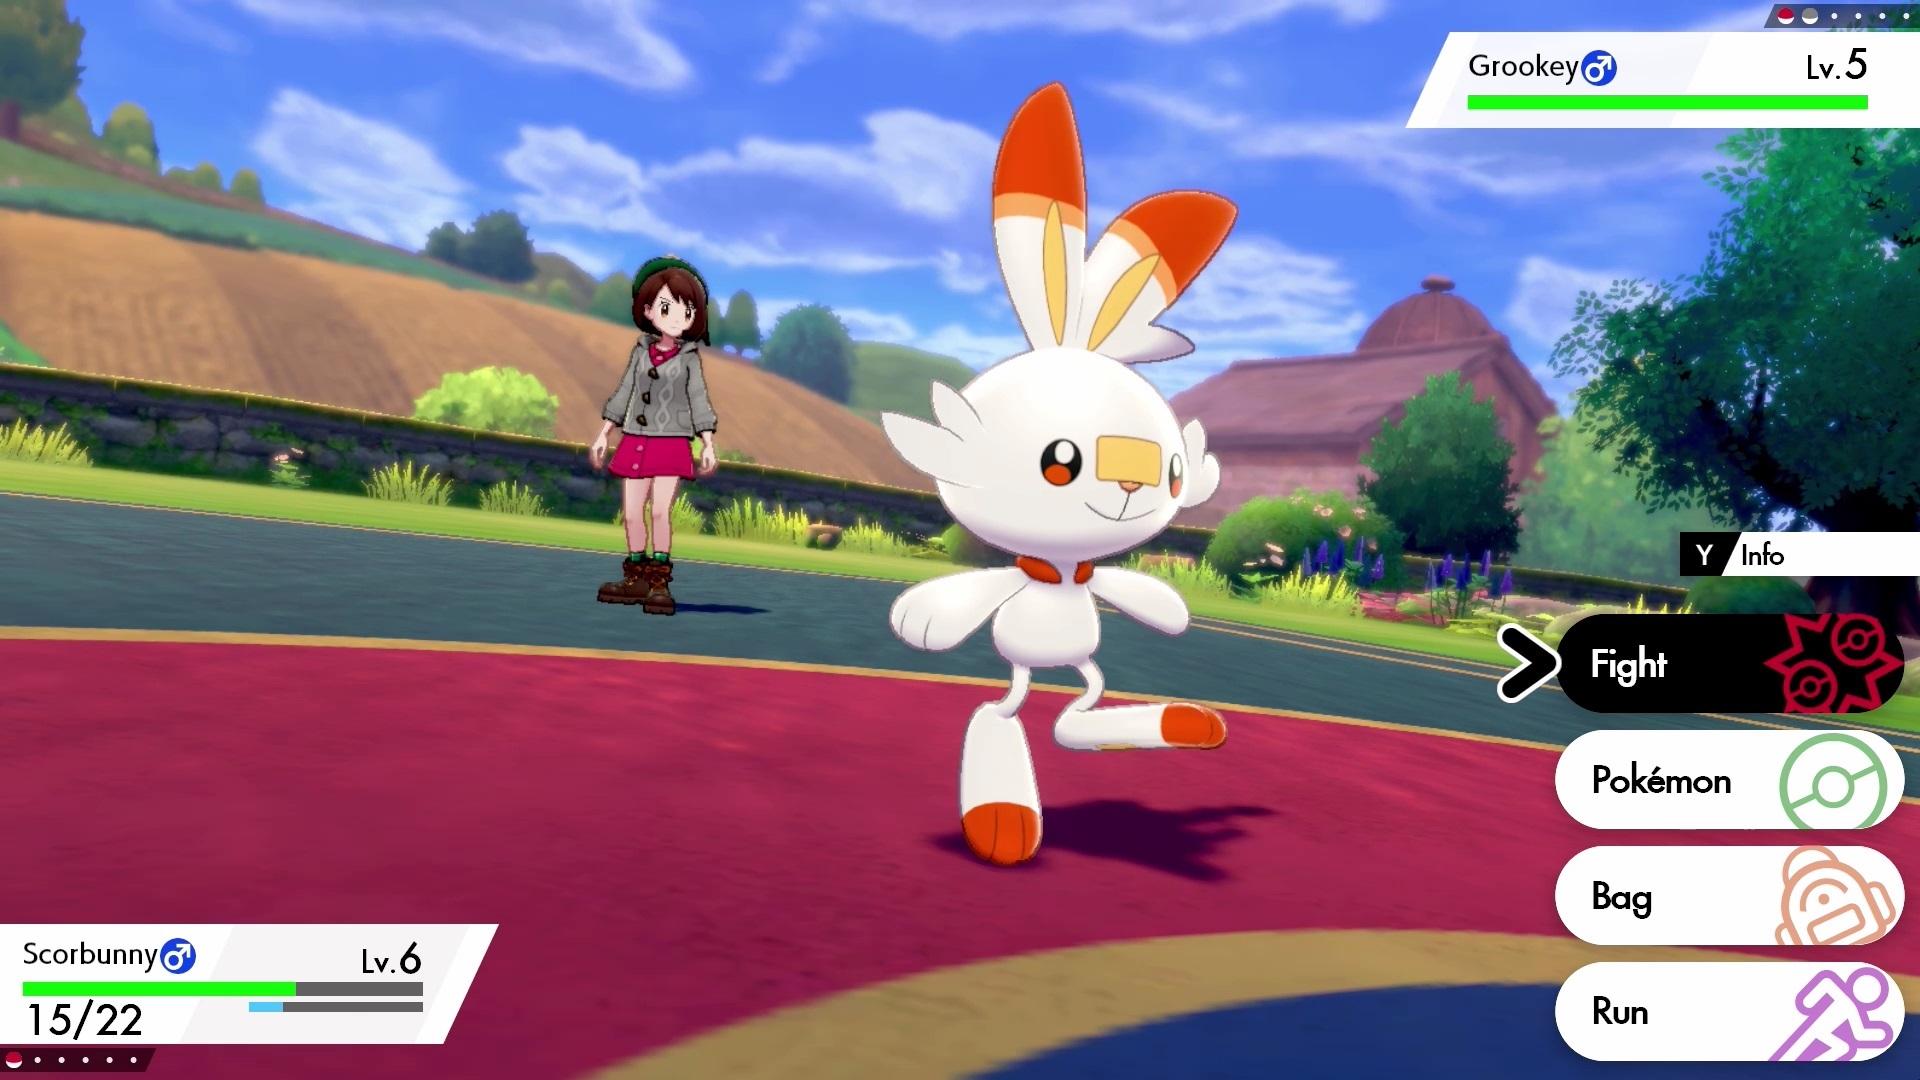 Game Freak reiterates it has 'no plans' to add missing